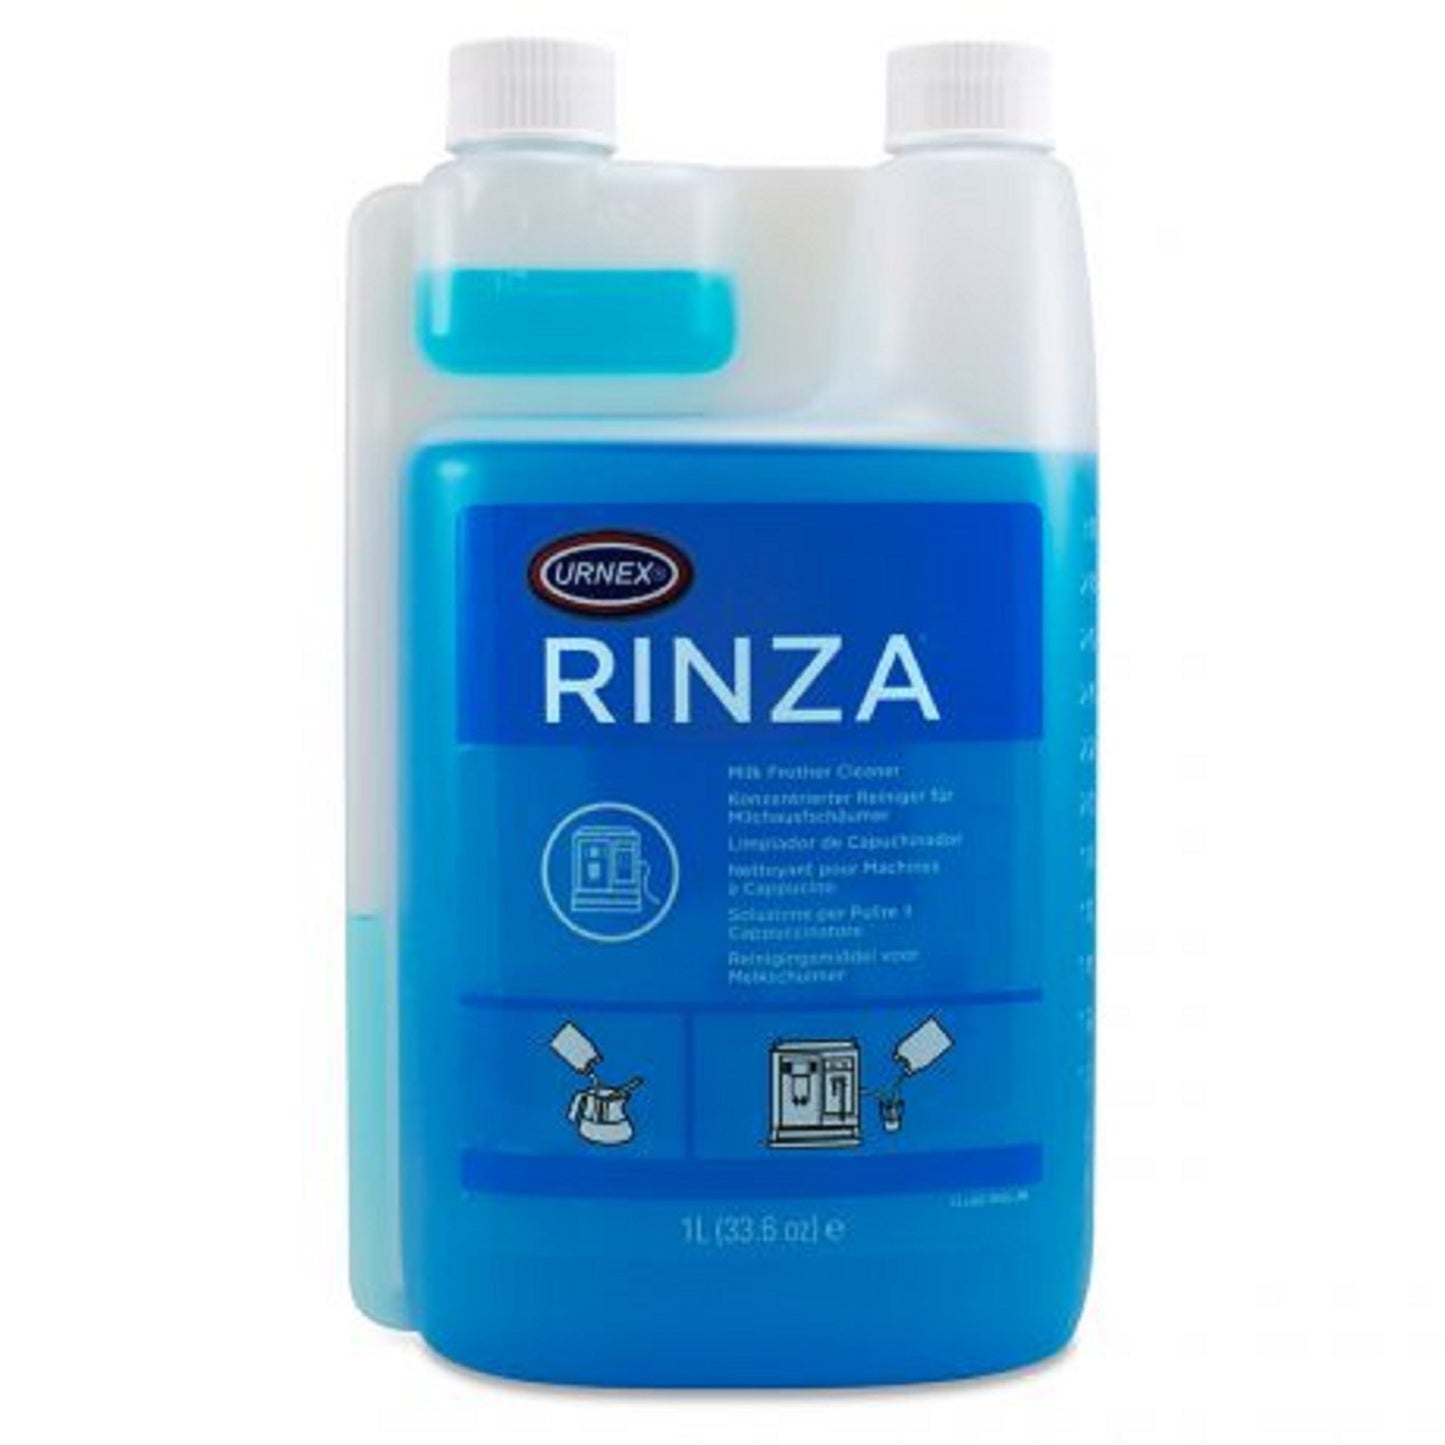 Load image into Gallery viewer, Urnex - Rinza Milk Frother Cleaner 1.1L - Velo Coffee Roasters
